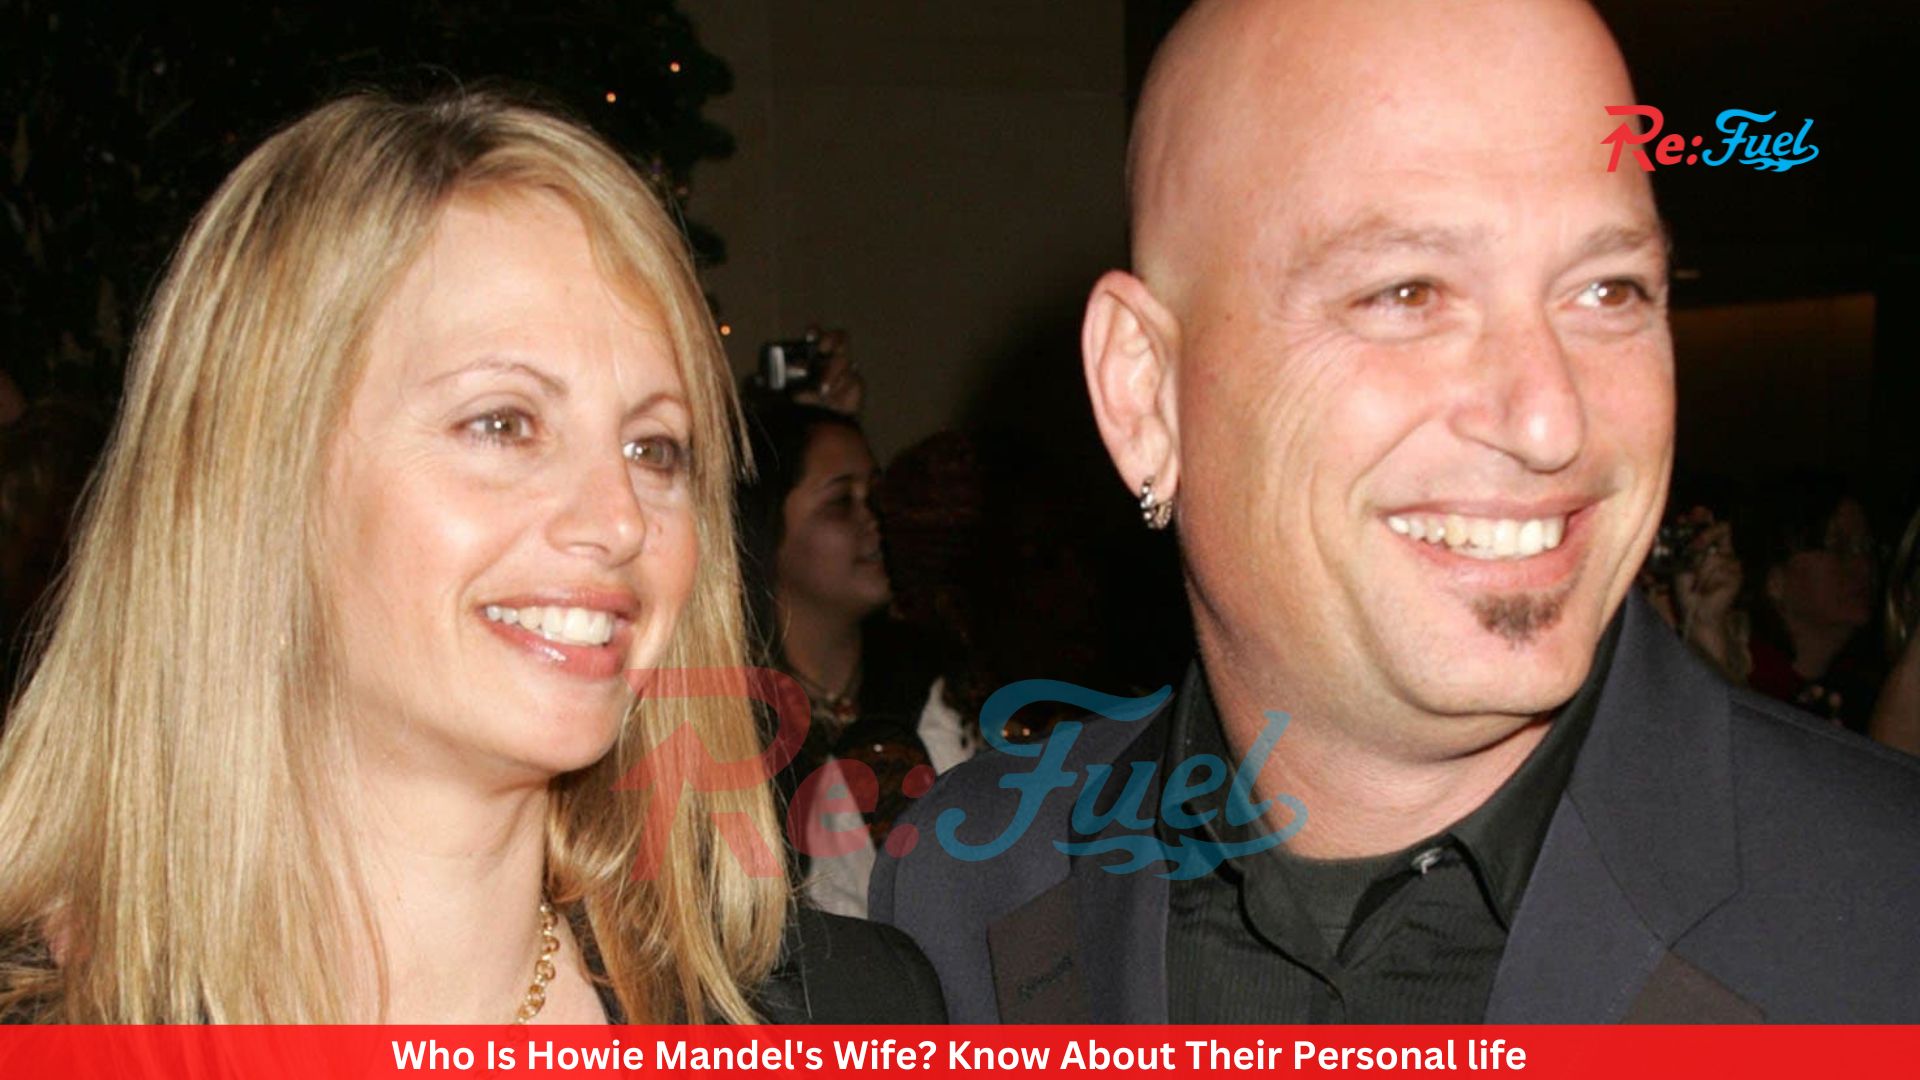 Who Is Howie Mandel's Wife? Know About Their Personal life